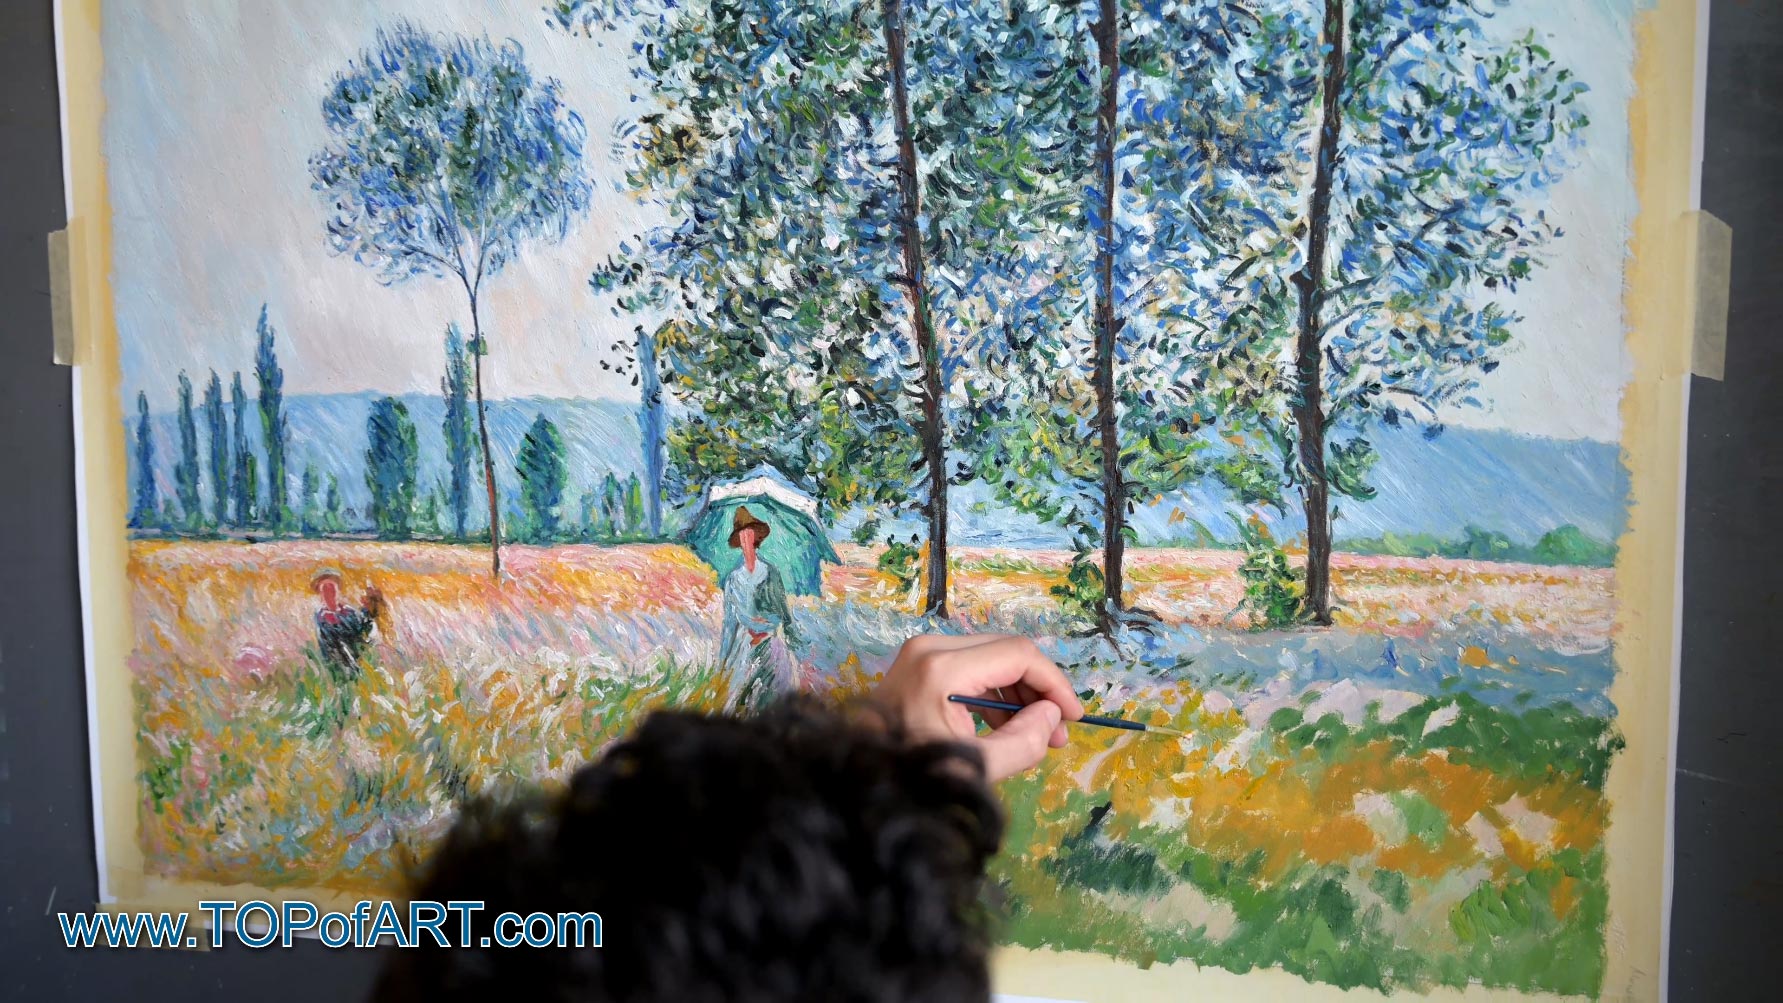 Claude Monet - "Under the Poplars, Sunlight Effect" - Process of Creation of the Painting